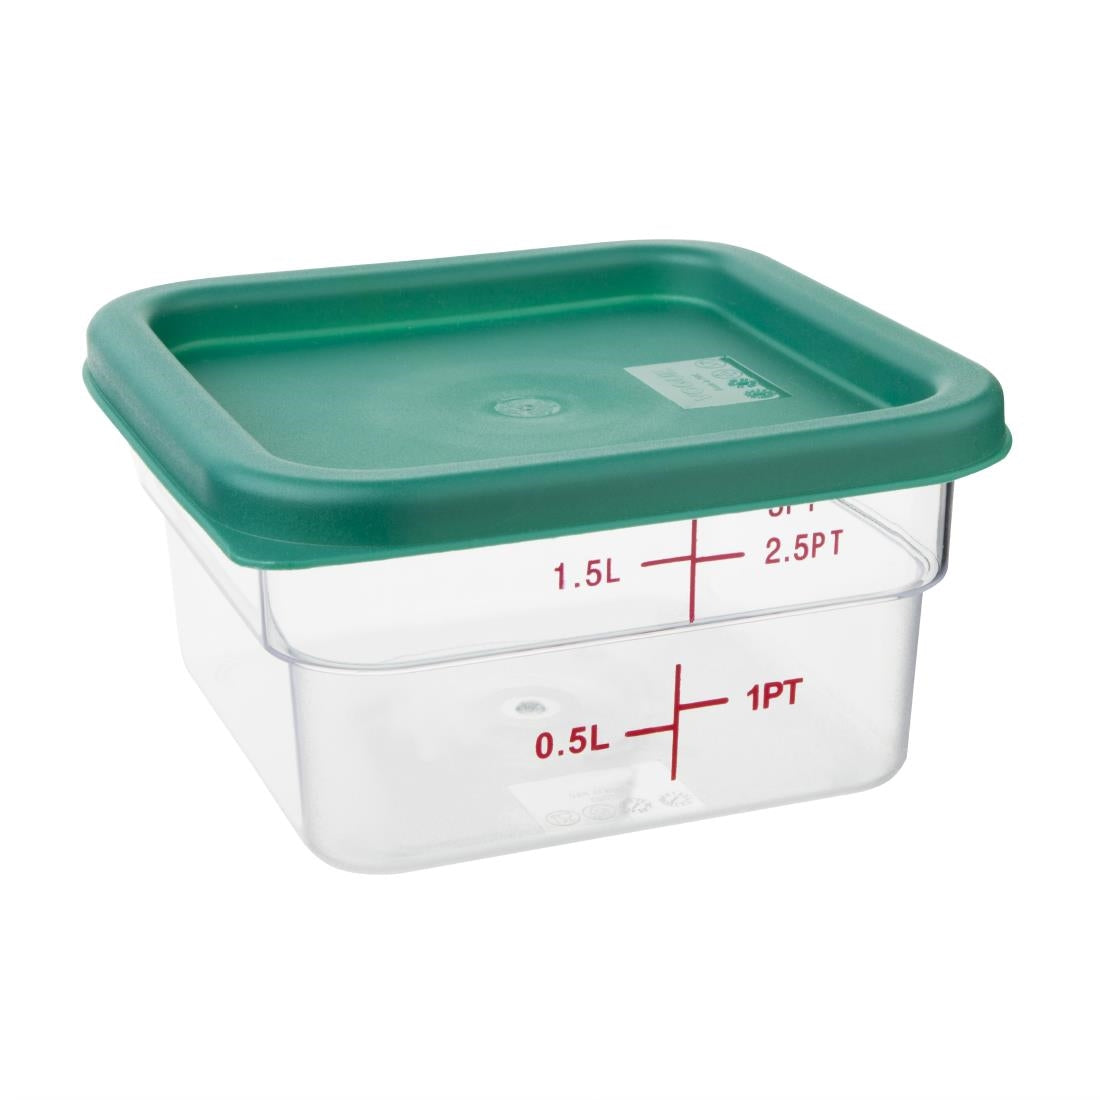 Vogue Polycarbonate Square Food Storage Container Lid Green Small